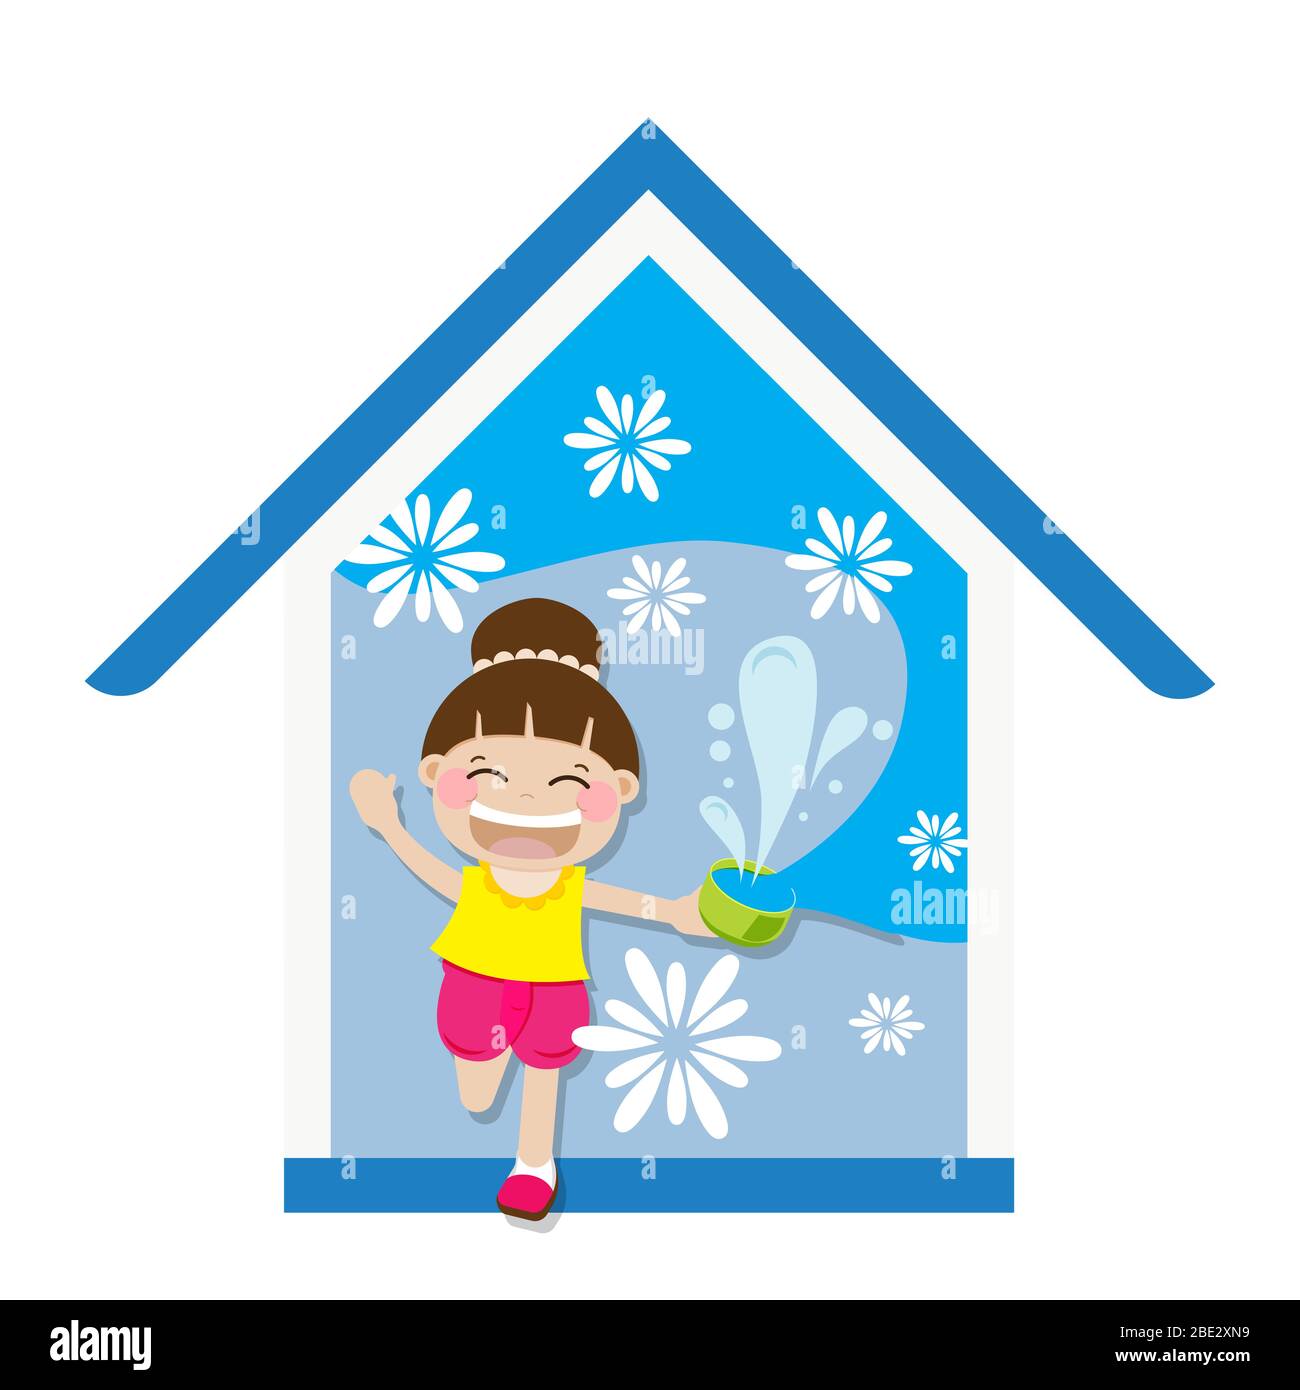 Stay home save life concept. Thai New Year during covid-19 coronavirus outbreak. Girl stay at home playing splash water for Songkran festival in Thail Stock Vector